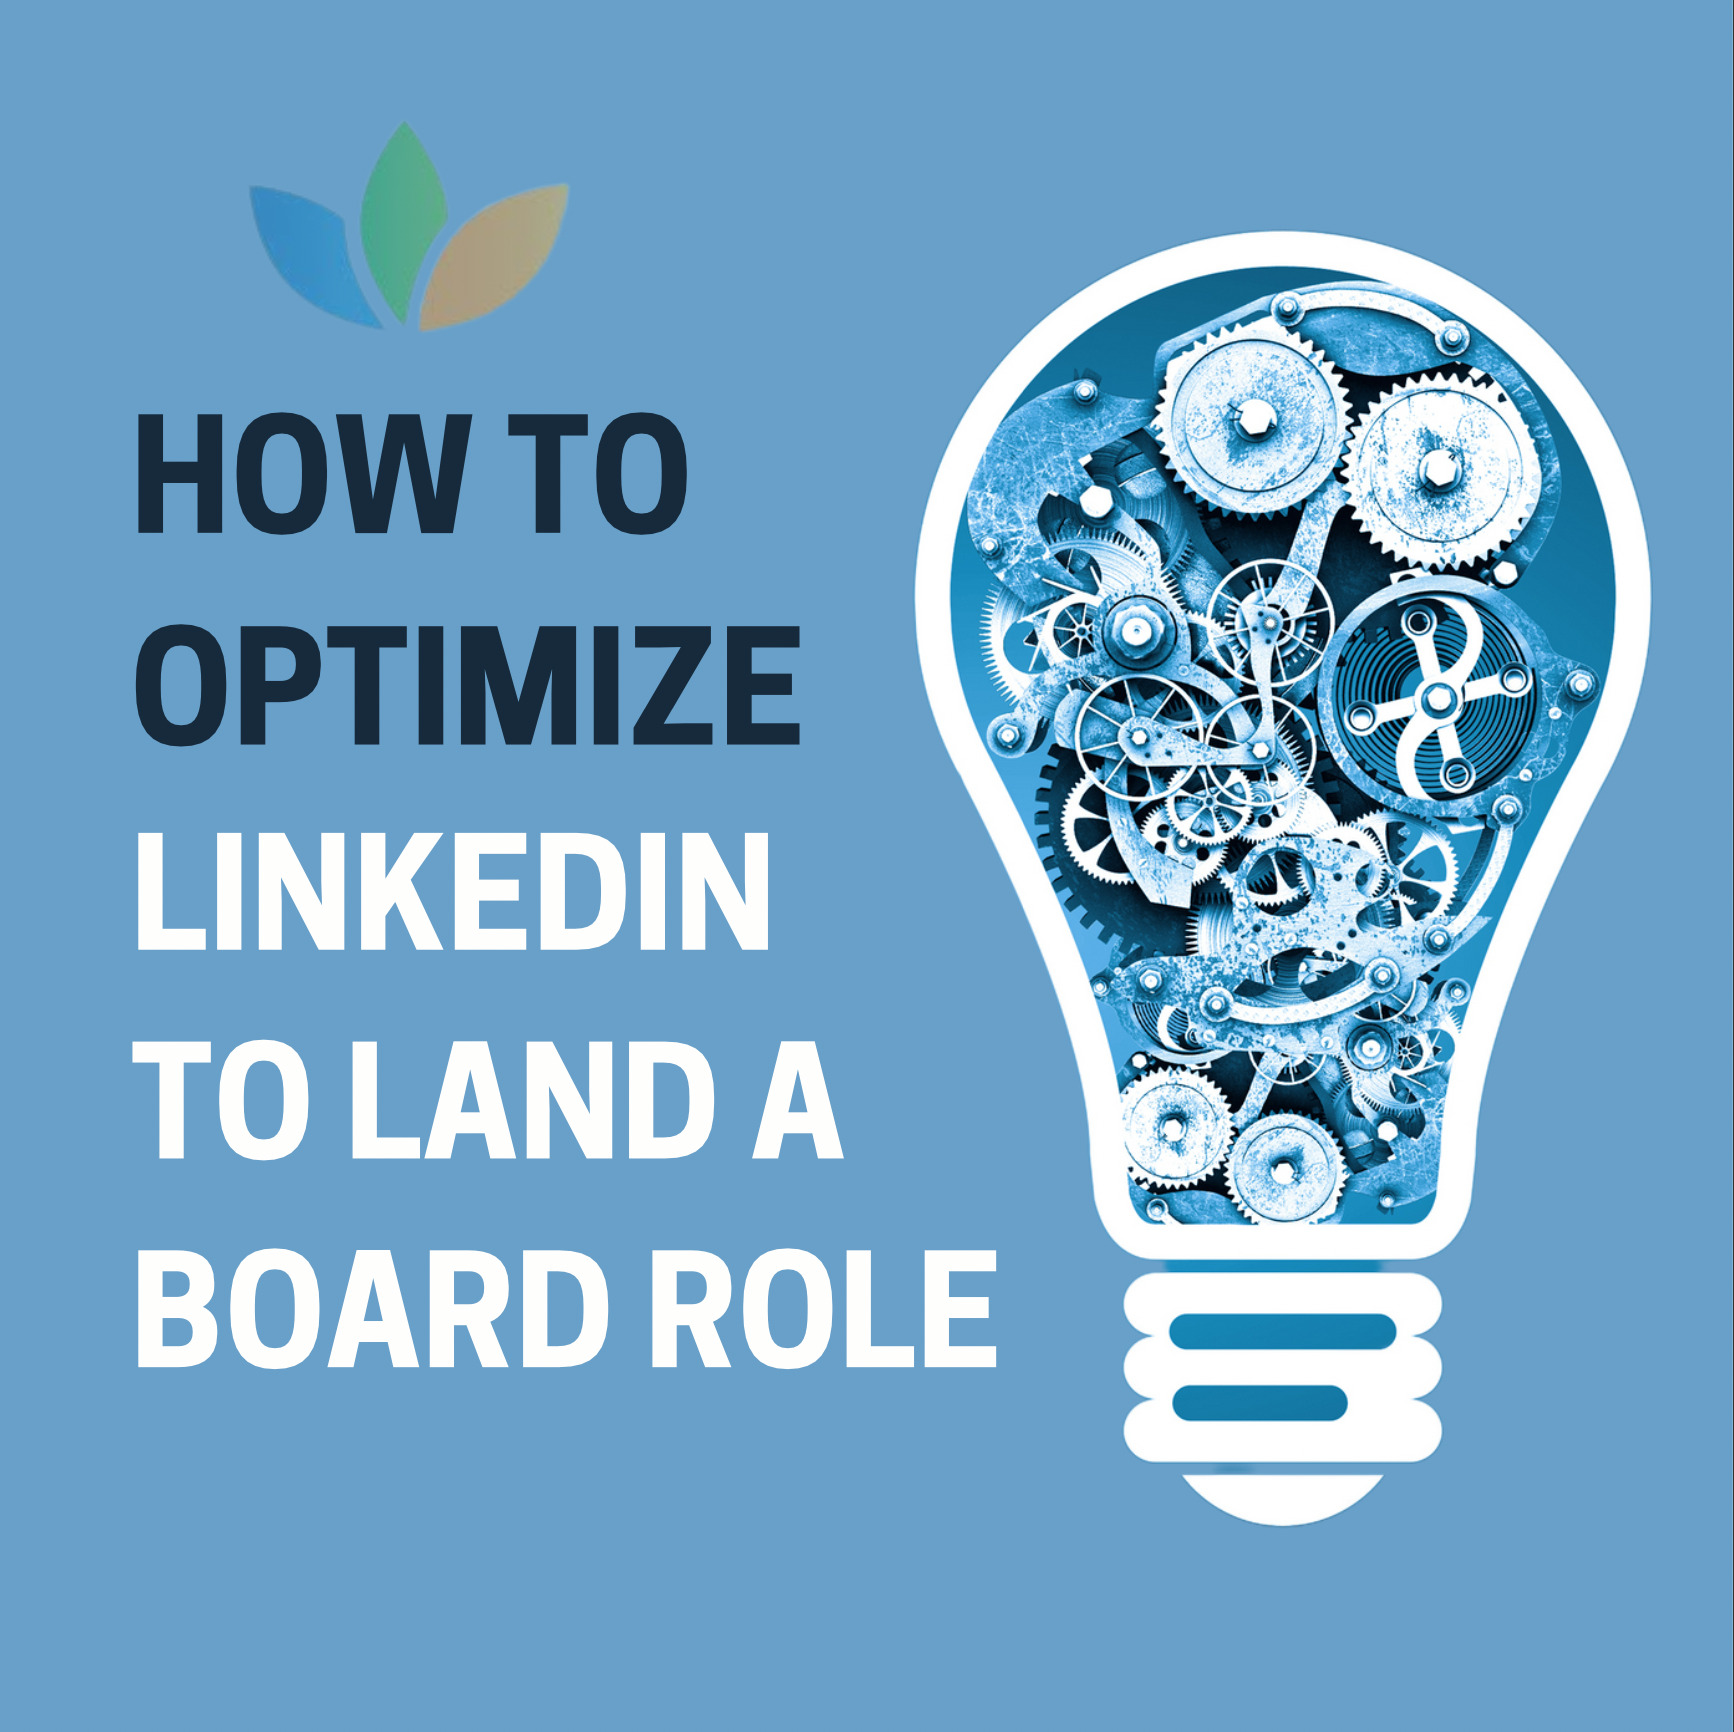 How to optimize LinkedIn to land a board role